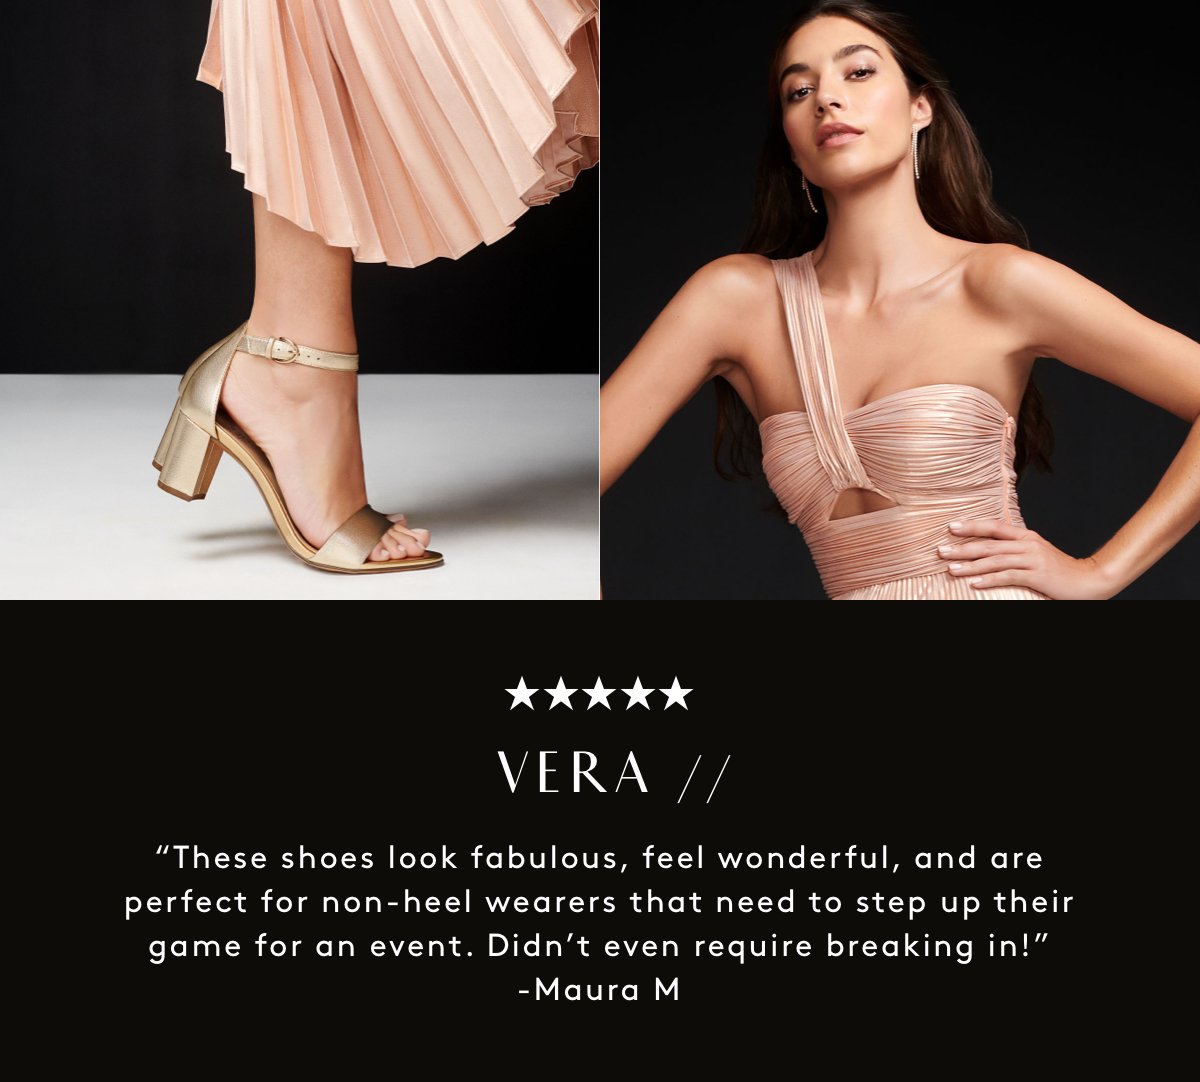 ★★★★★ VERA // “These shoes look fabulous, feel wonderful, and are perfect for non-heel wearers that need to step up their game for an event. Didn’t even require breaking in!” -Maura M